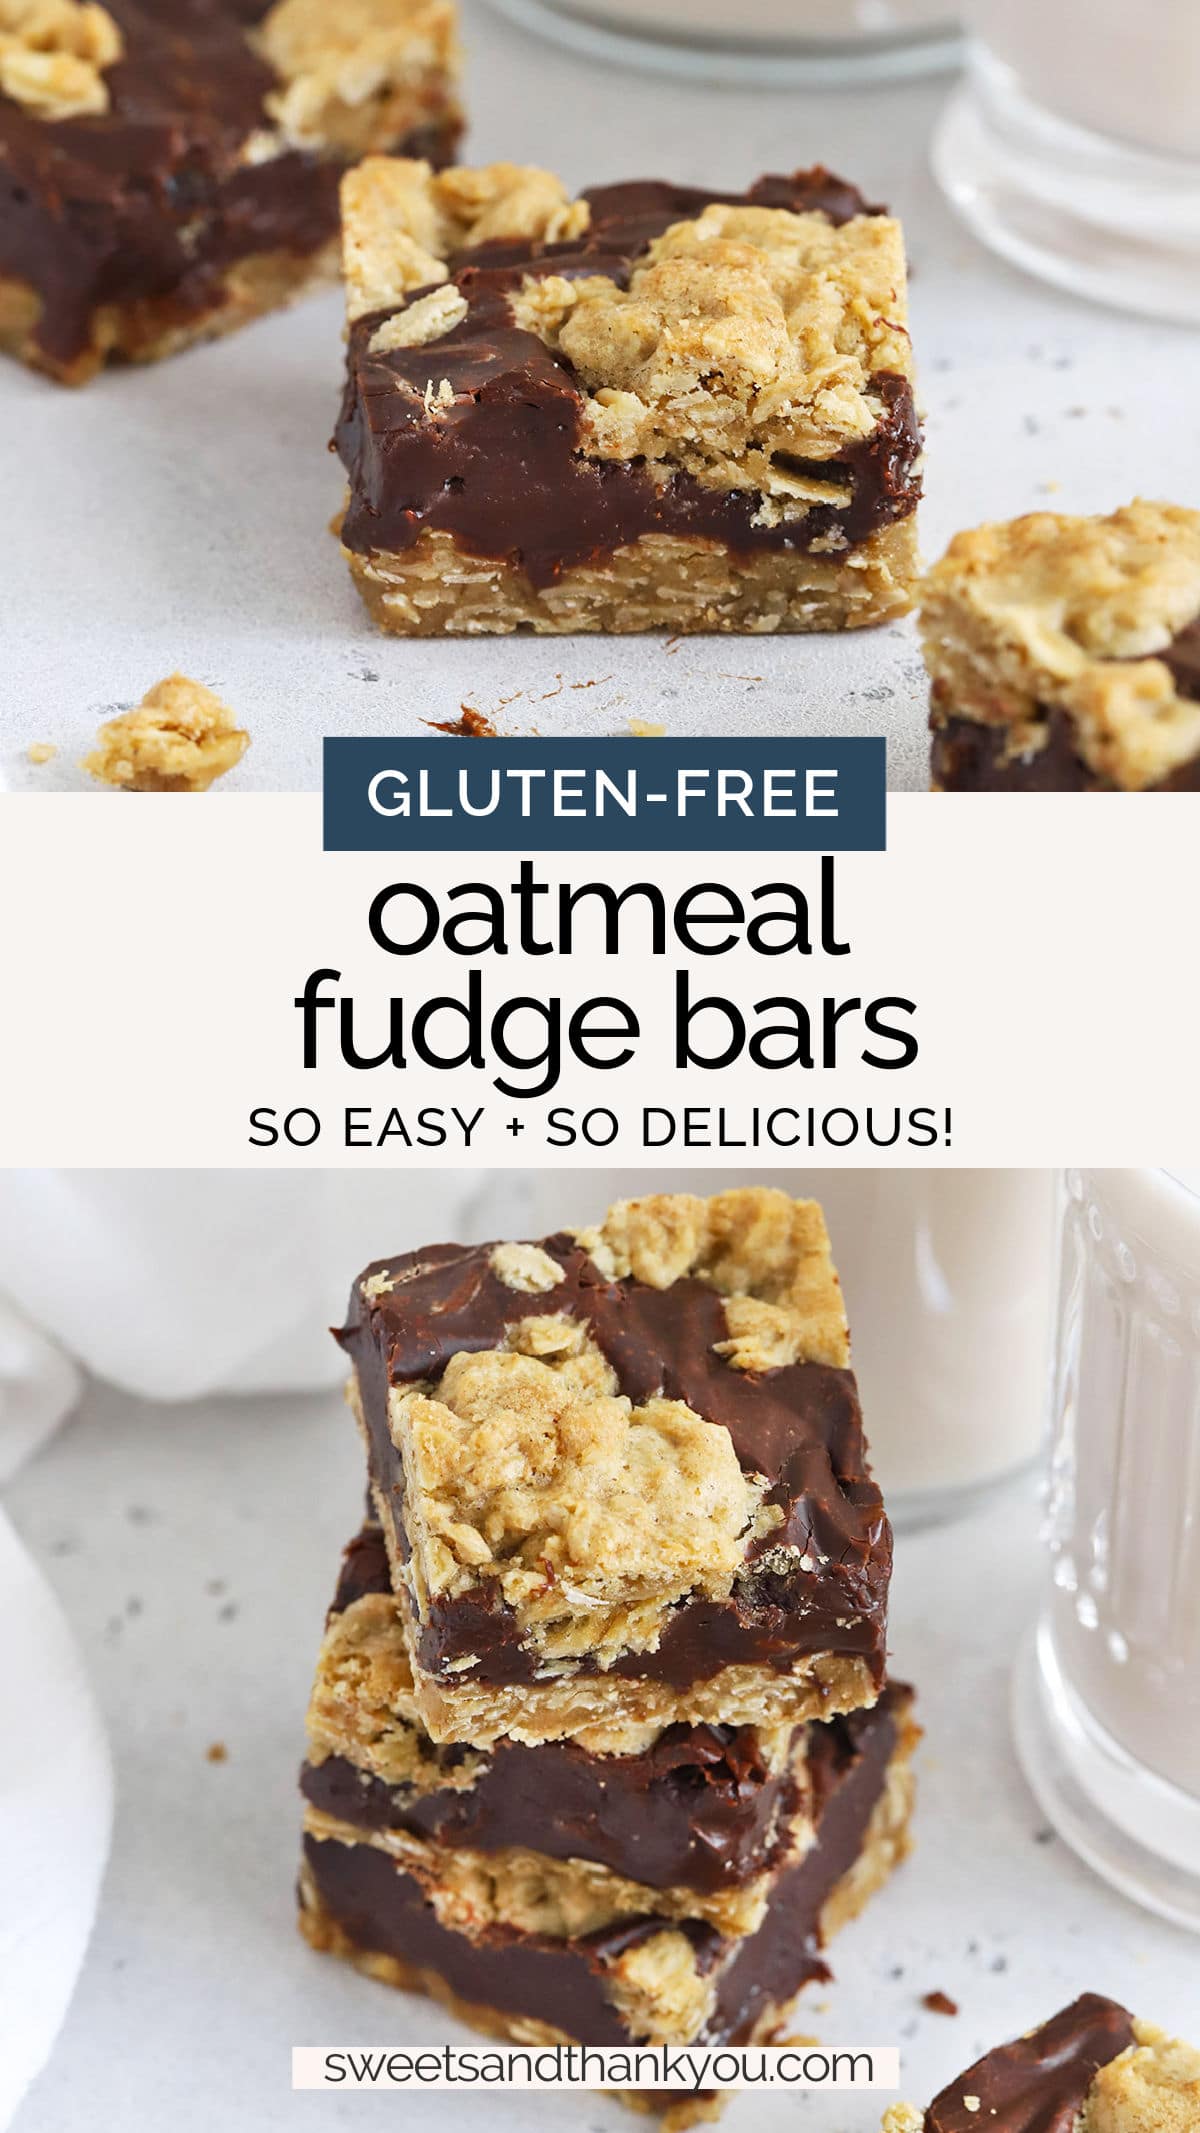 Gluten-Free Oatmeal Fudge Bars - This gooey oatmeal fudge bars recipe gets a gluten-free glow-up! You'll love the texture & flavor of these yummy chocolate oat bars. // the best gluten free chocolate oatmeal bars // gluten free chocolate oat bars // gluten-free fudge bars // gluten-free starbucks chocolate oat bars // gluten-free starbucks chocolate oatmeal bars // oatmeal fudgies // oatmeal fudgy bars // gluten-free cookie bars // easy gluten-free dessert //